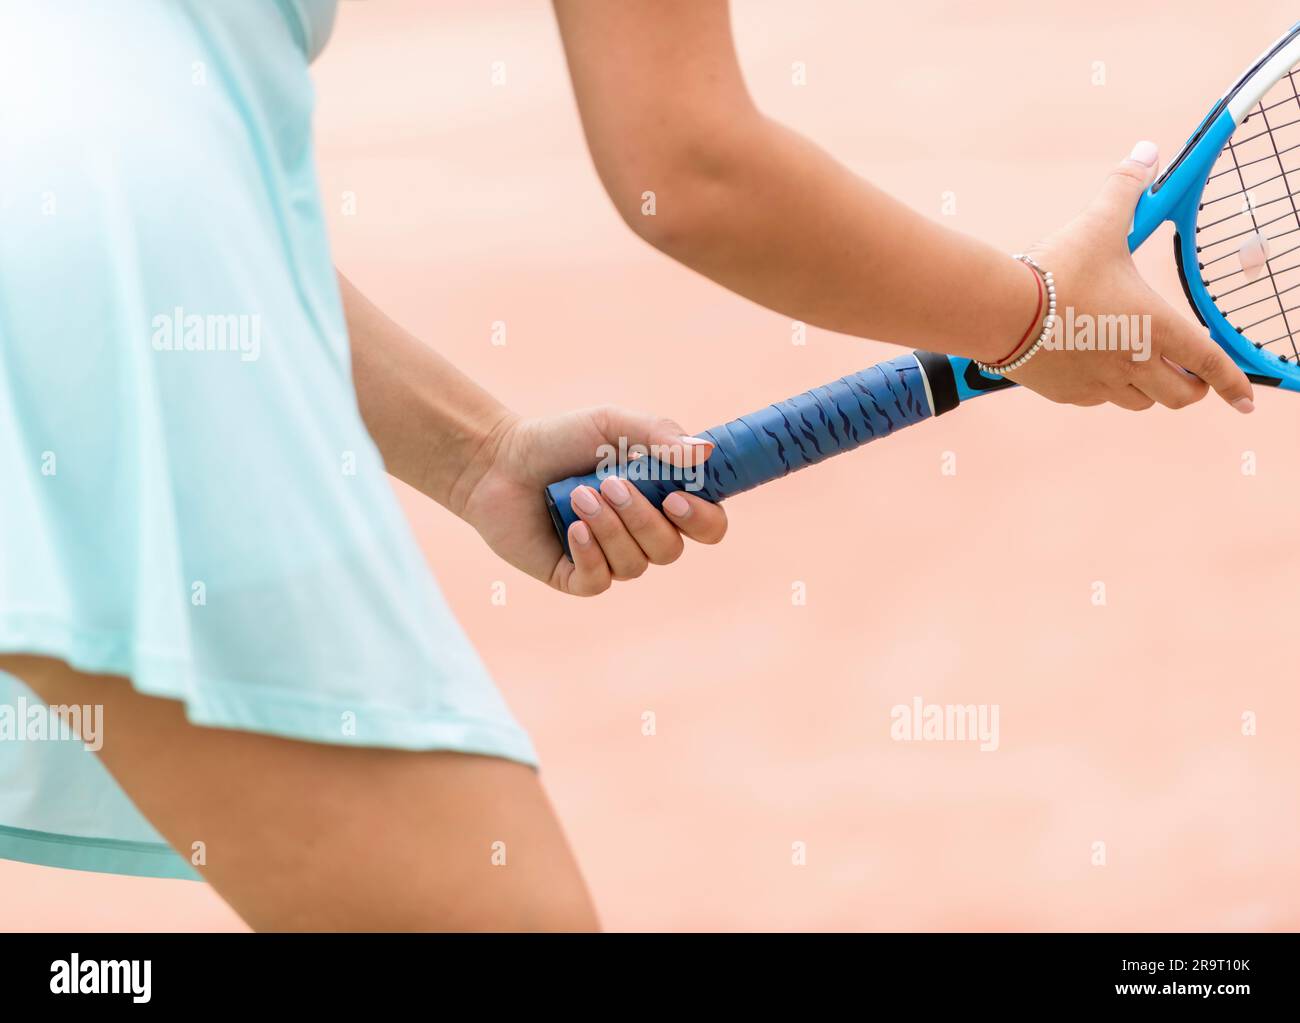 Woman tennis player in action. Horizontal sport theme poster, greeting cards, headers, website and app Stock Photo